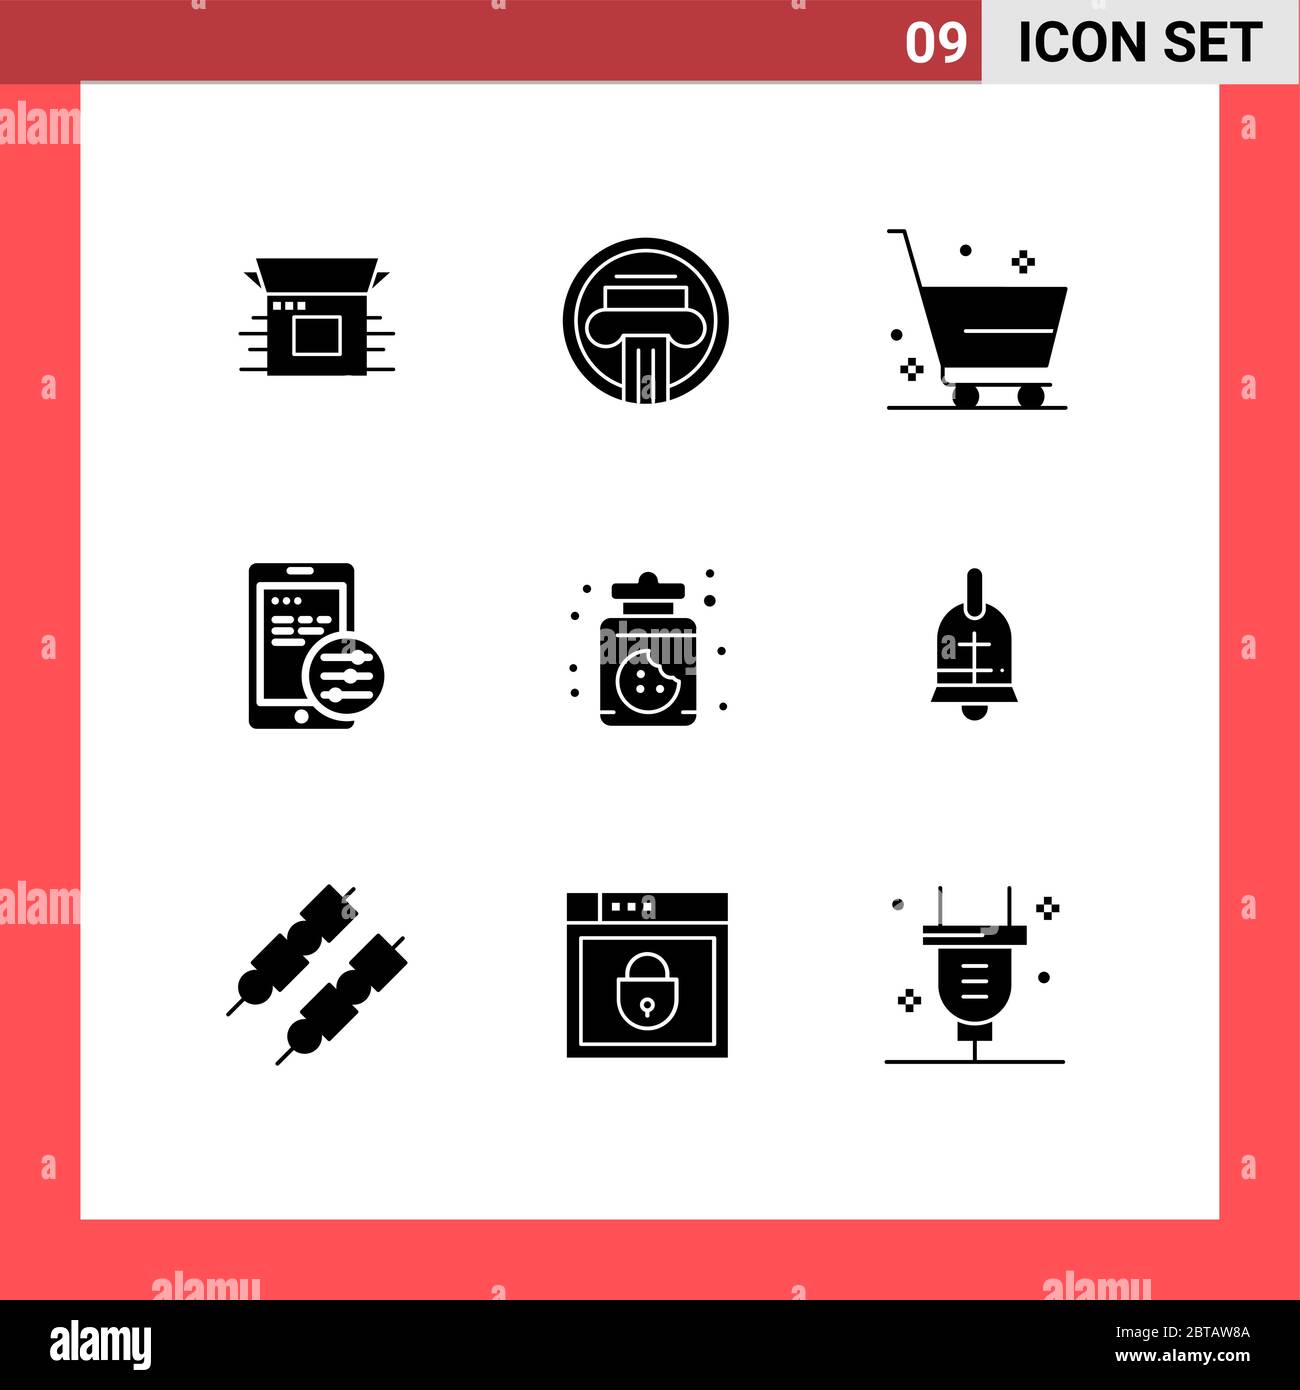 Mobile Interface Solid Glyph Set of 9 Pictograms of dessert, mobile, decoration, gdpr, e commerce Editable Vector Design Elements Stock Vector